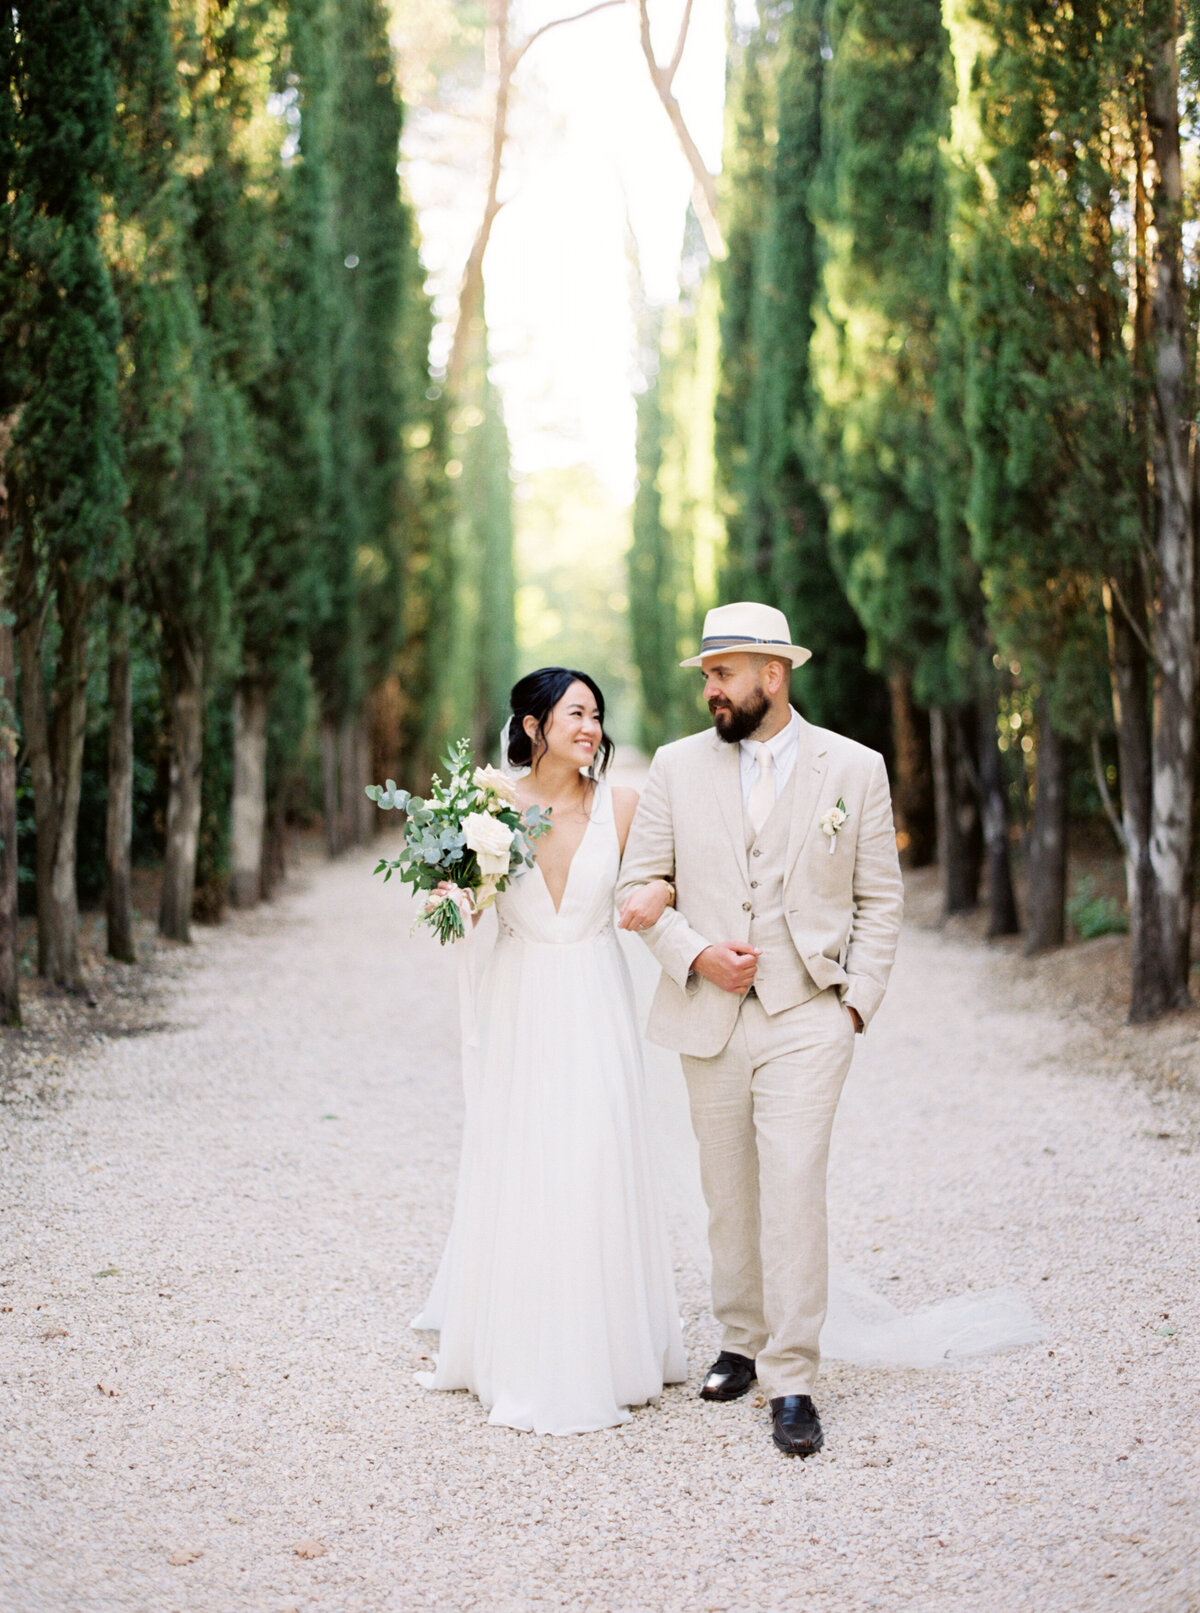 Bride and groom walk down tree lined path on their wedding day